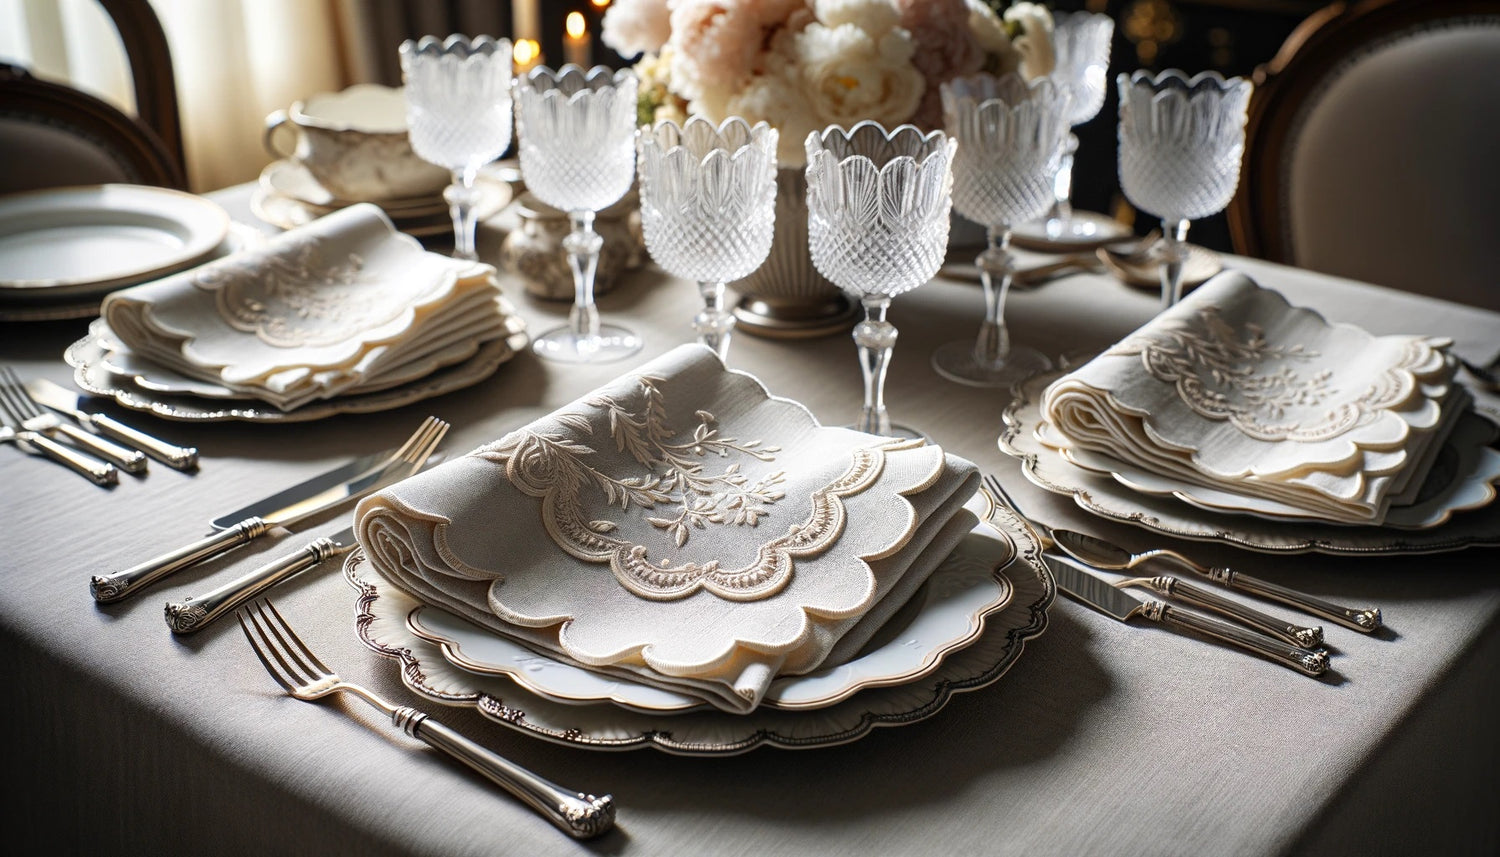 A set of elegant scallop napkins in a sophisticated dining setting.